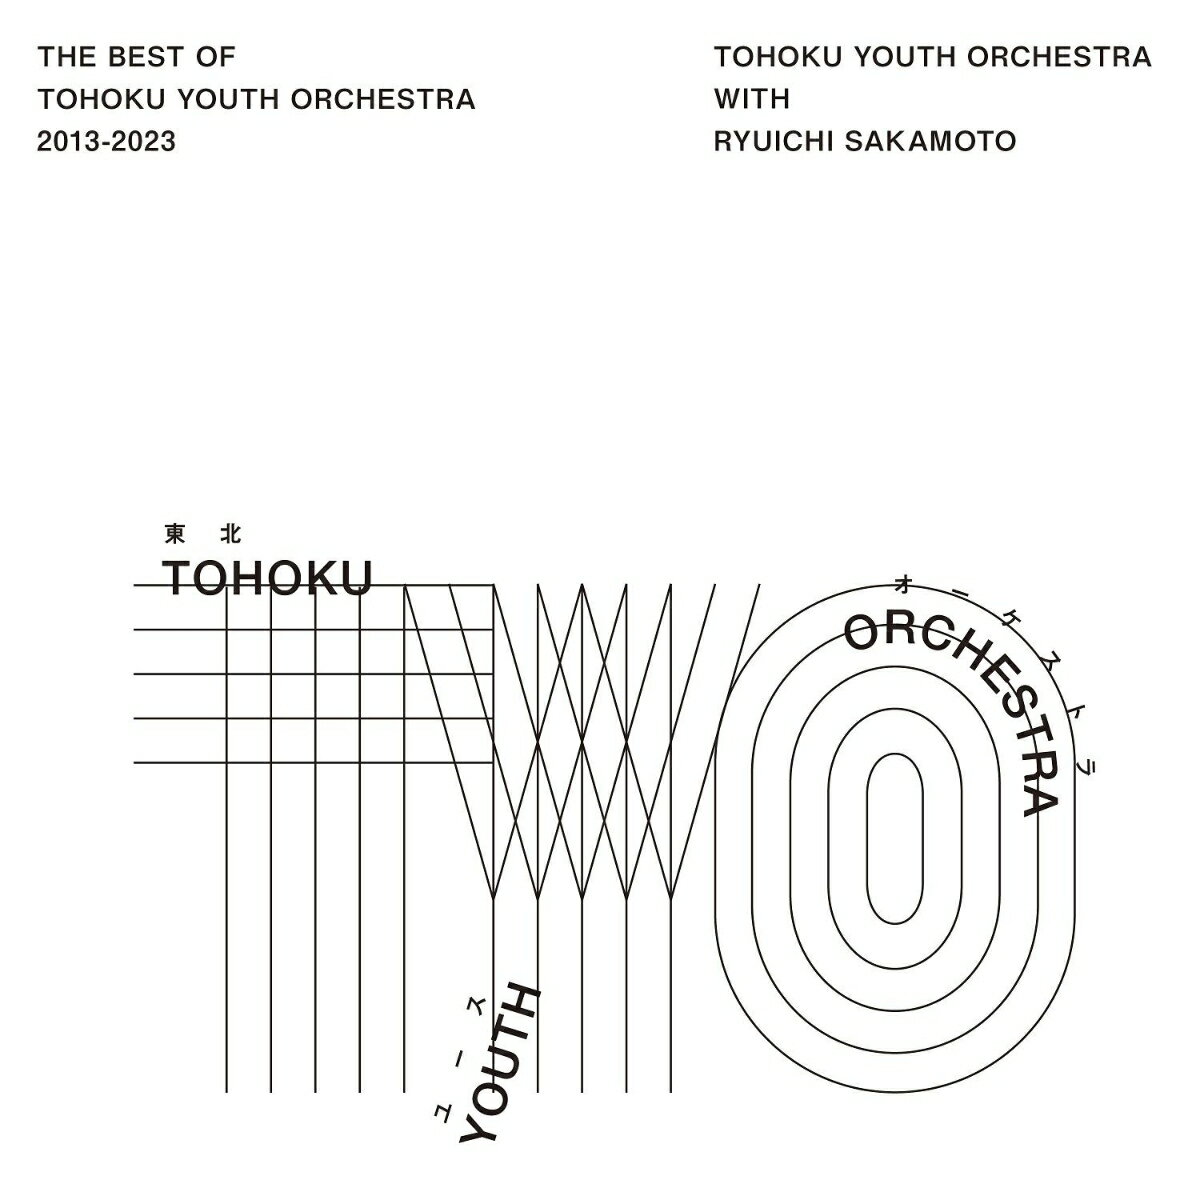 The Best of Tohoku Youth Orchestra 2013〜2023